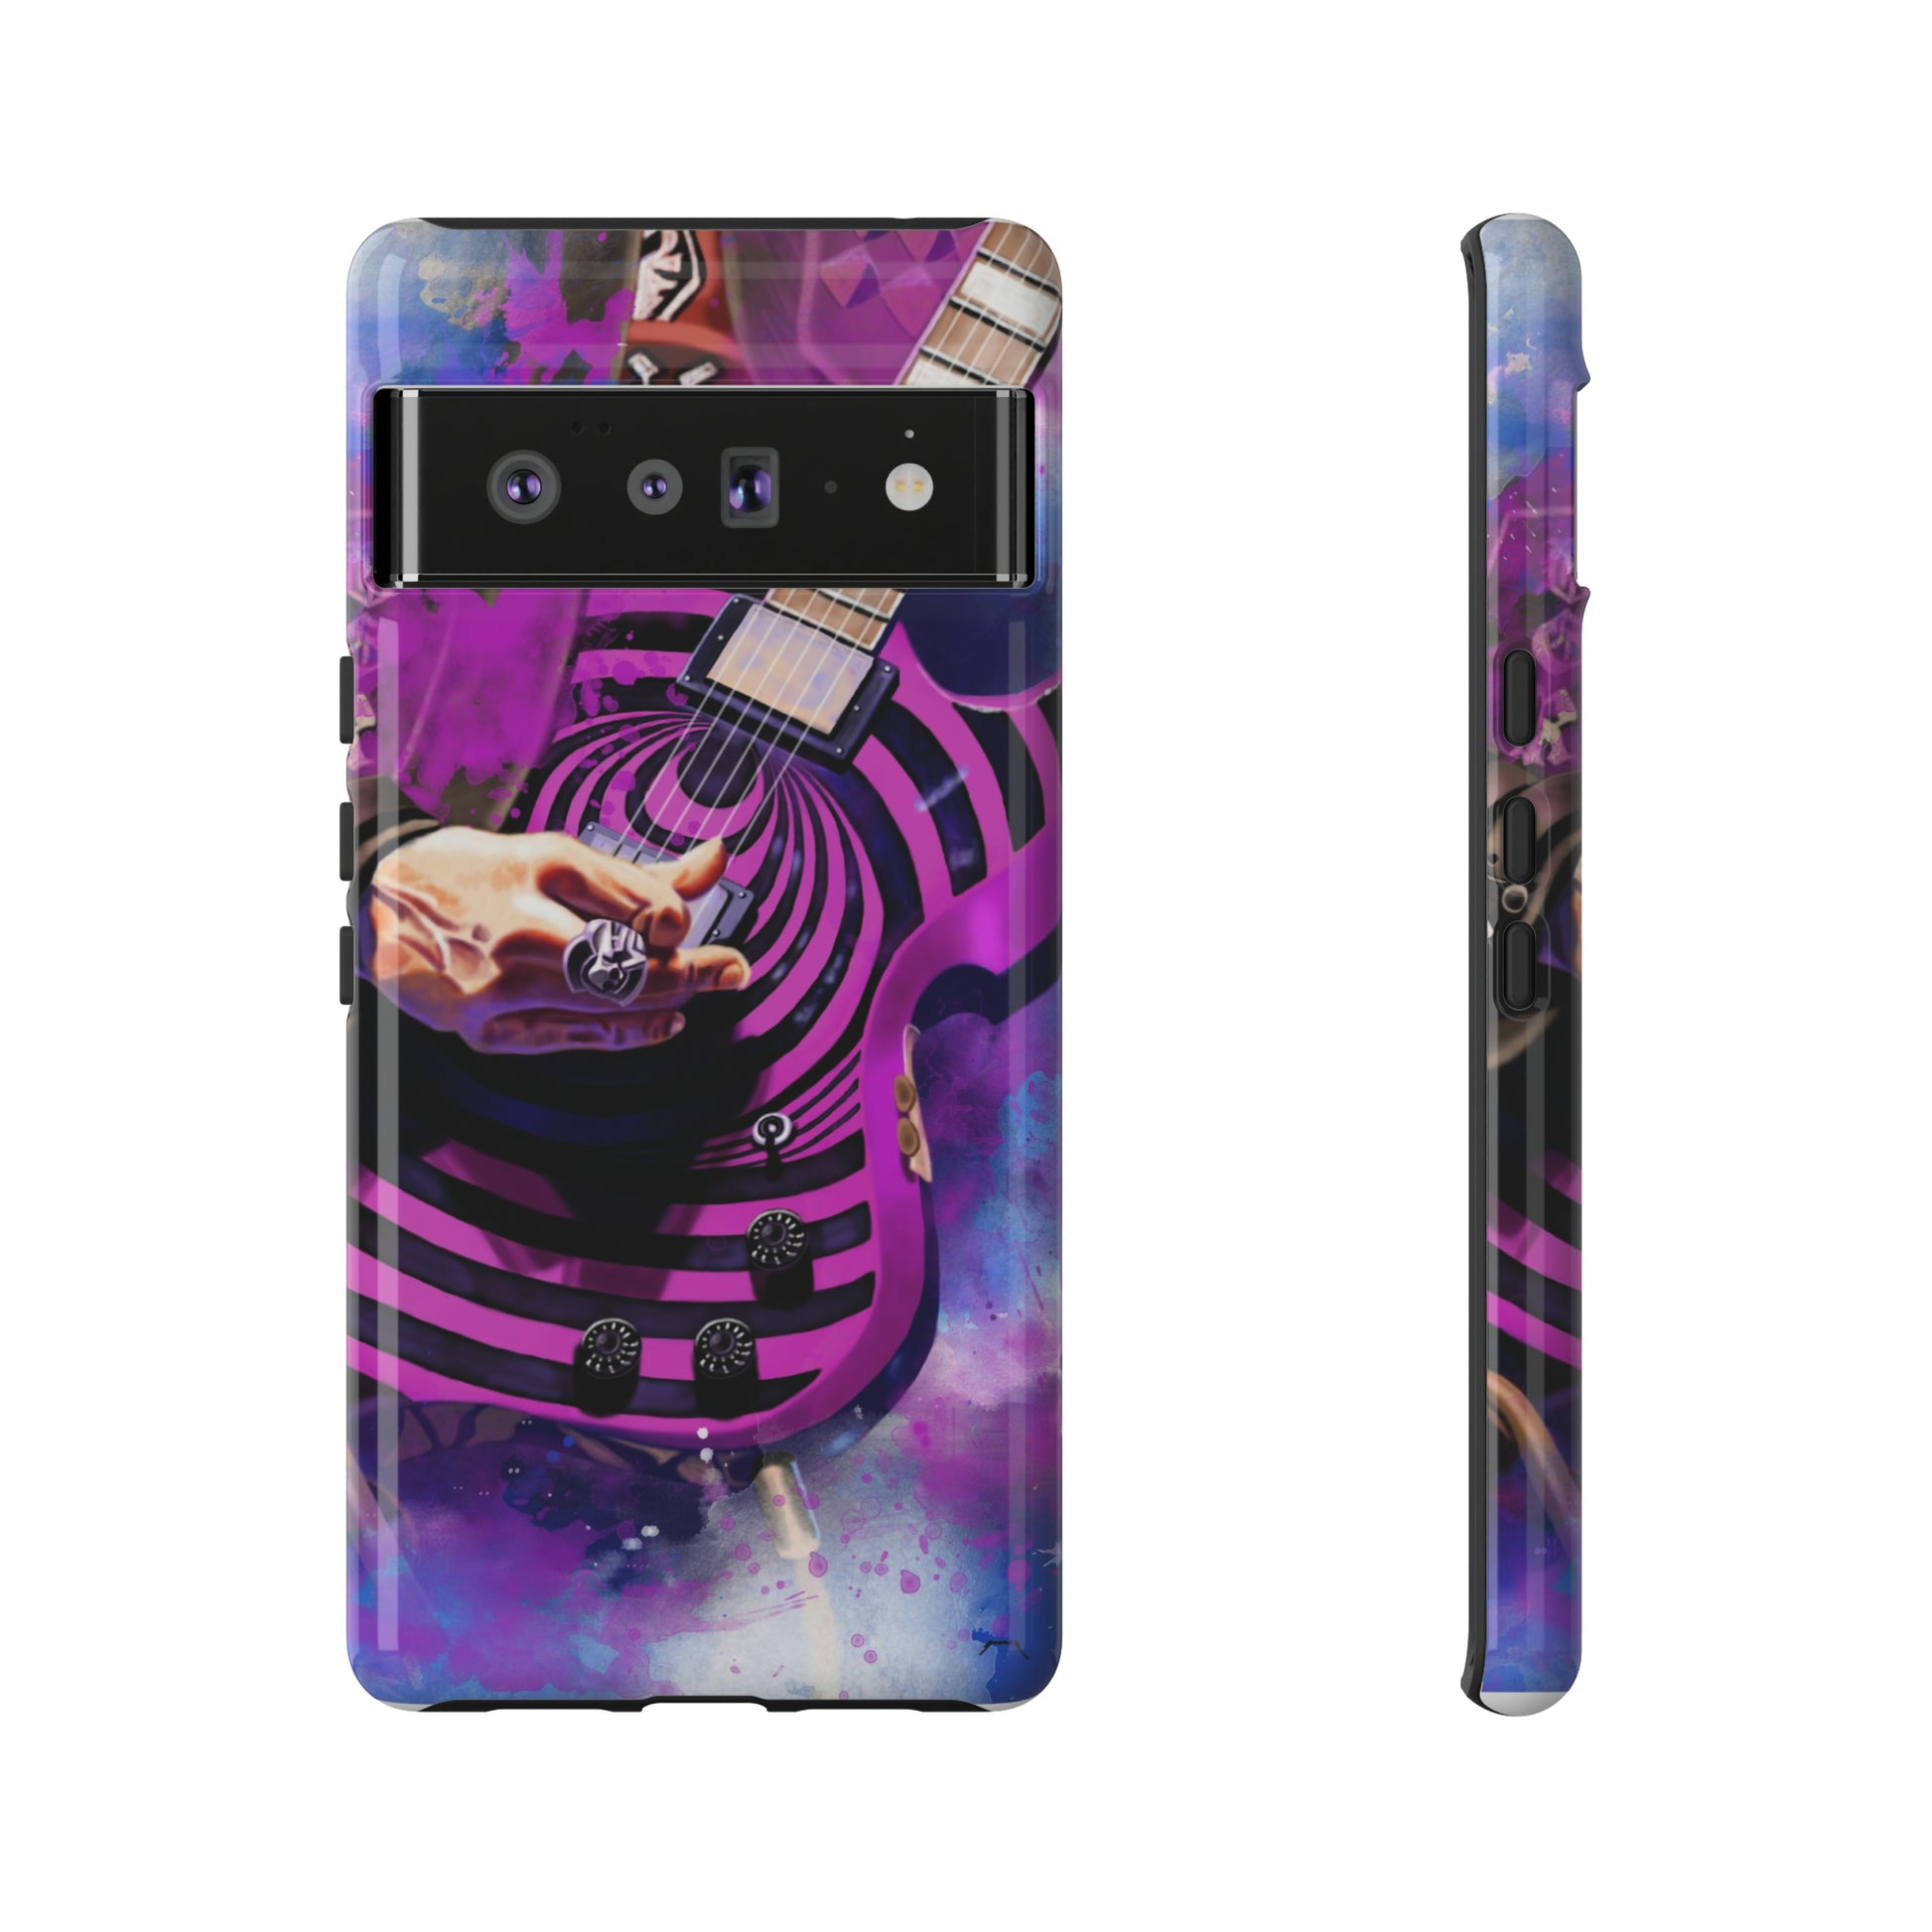 digital painting of a purple-black electric guitar with hand printed on google phone case